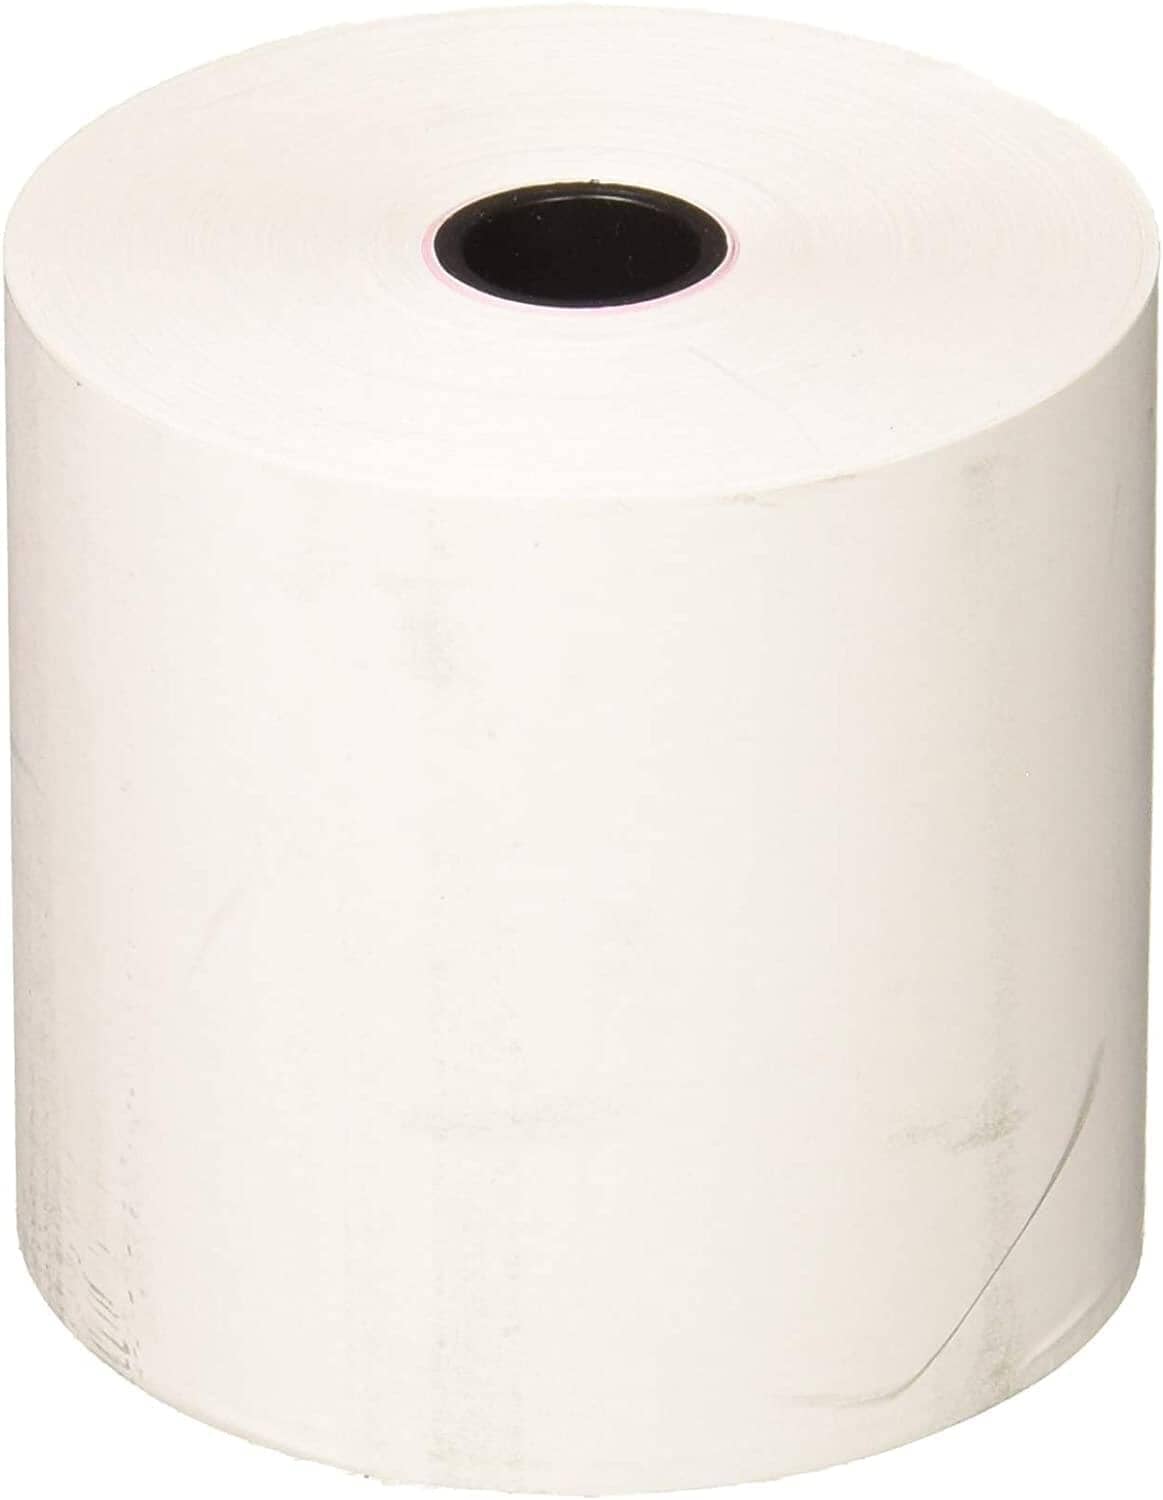 Thermal Register Tape Roll (2.25 x 150')